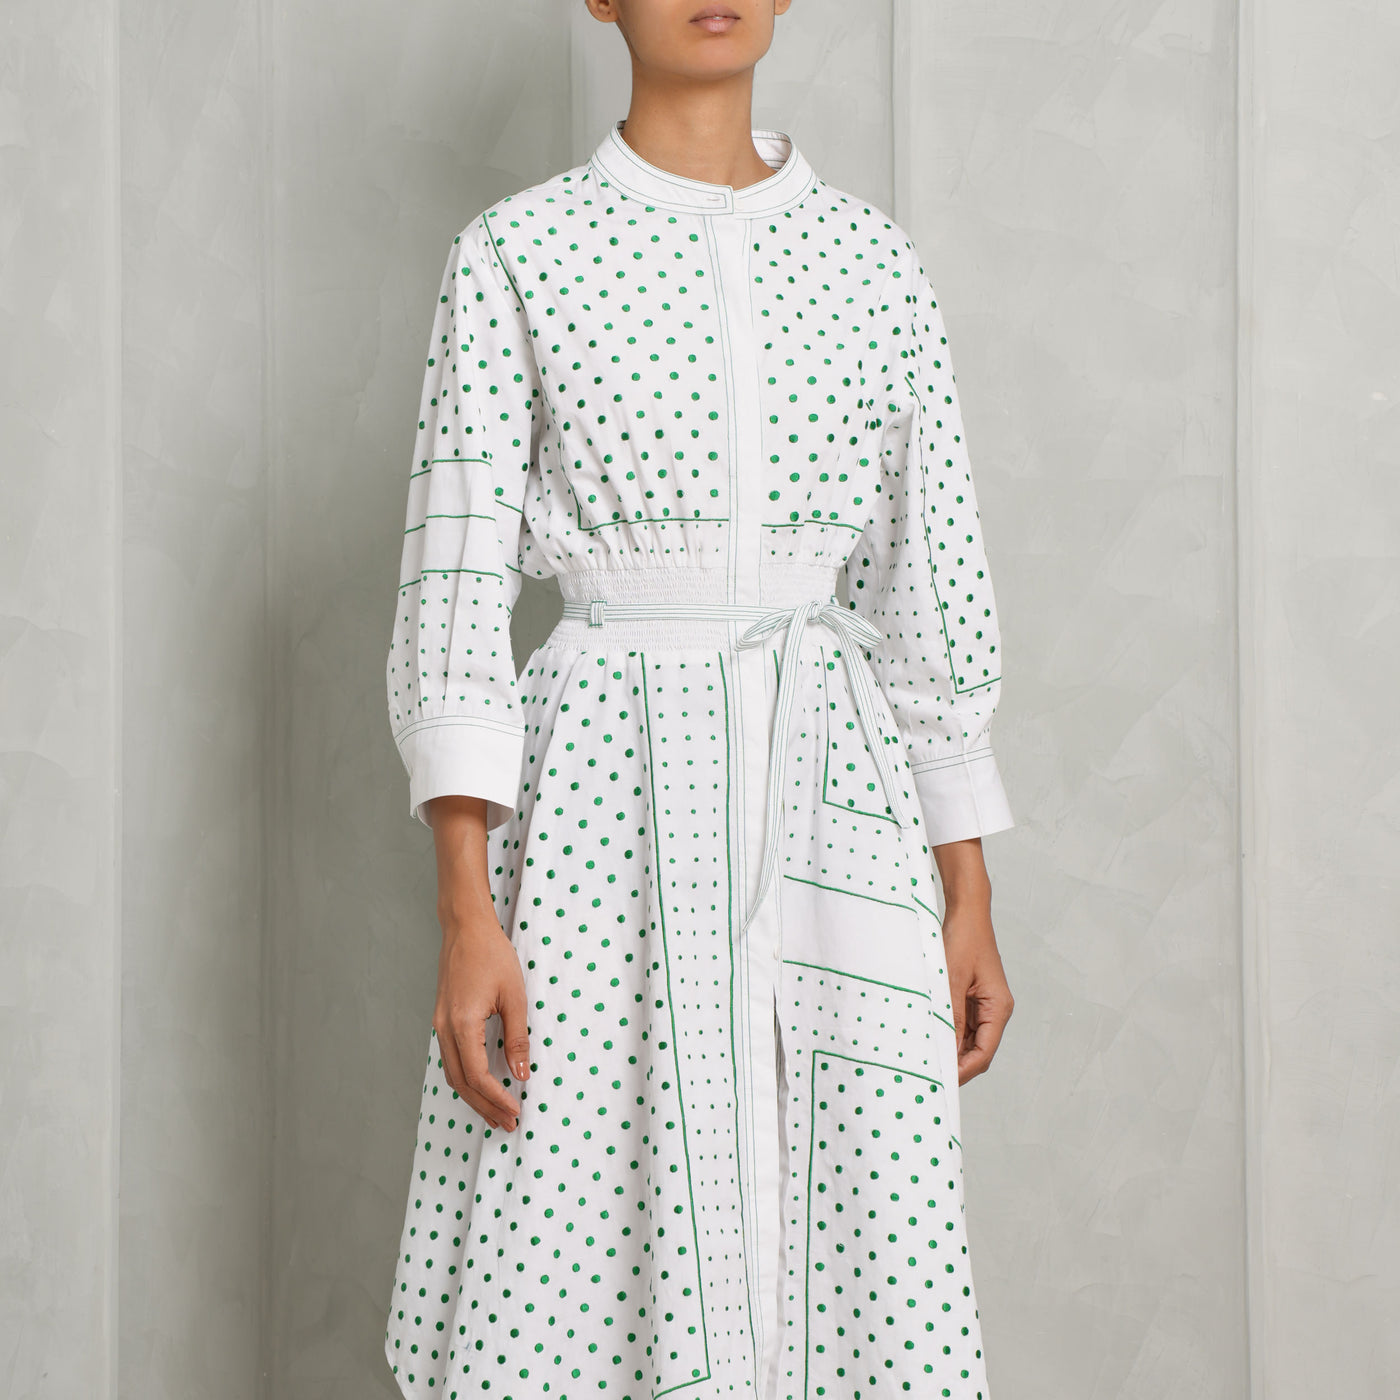 Leh Studios Hankerchief Midi Dress with  long sleeves with buttoned cuffs, inseam pockets and a concealed front button placket.